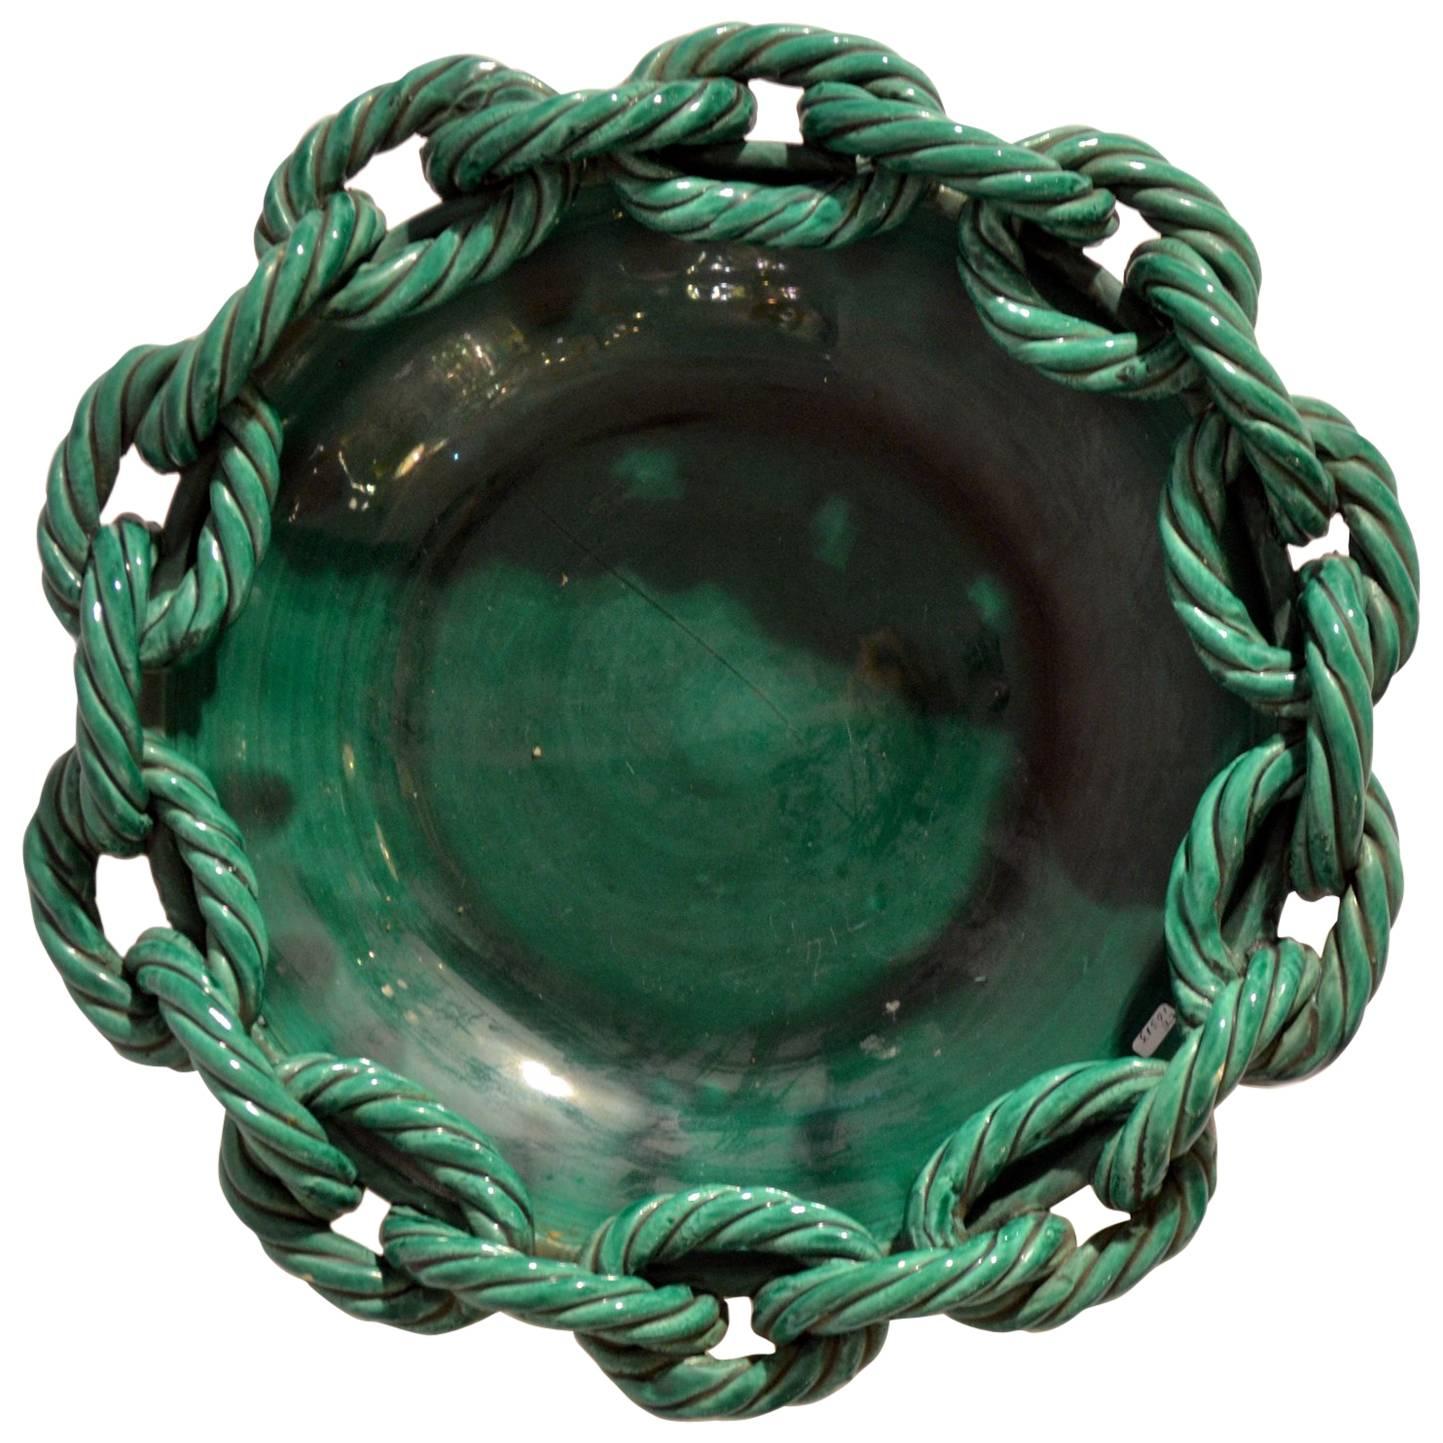 1950s Bowl in Emerald Green Ceramic with Chained Rope Edge by Vallauris, France